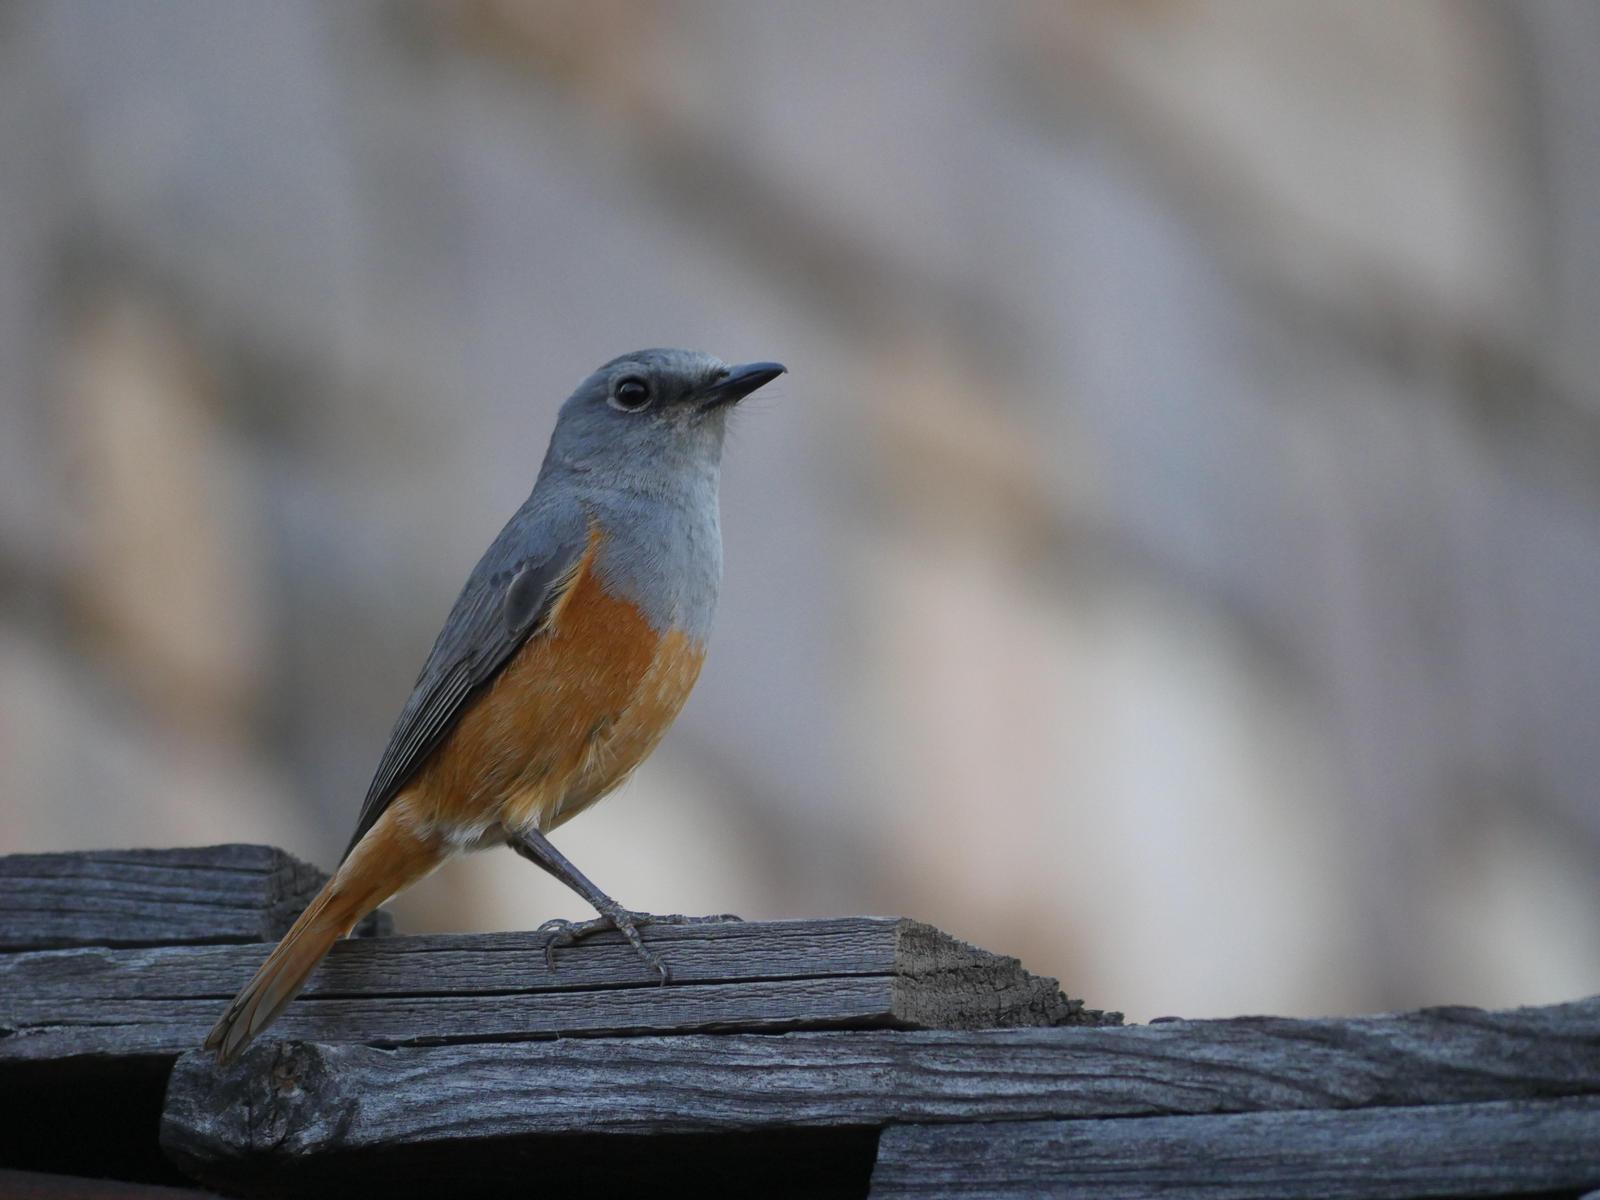 Forest Rock-Thrush Photo by Peter Lowe